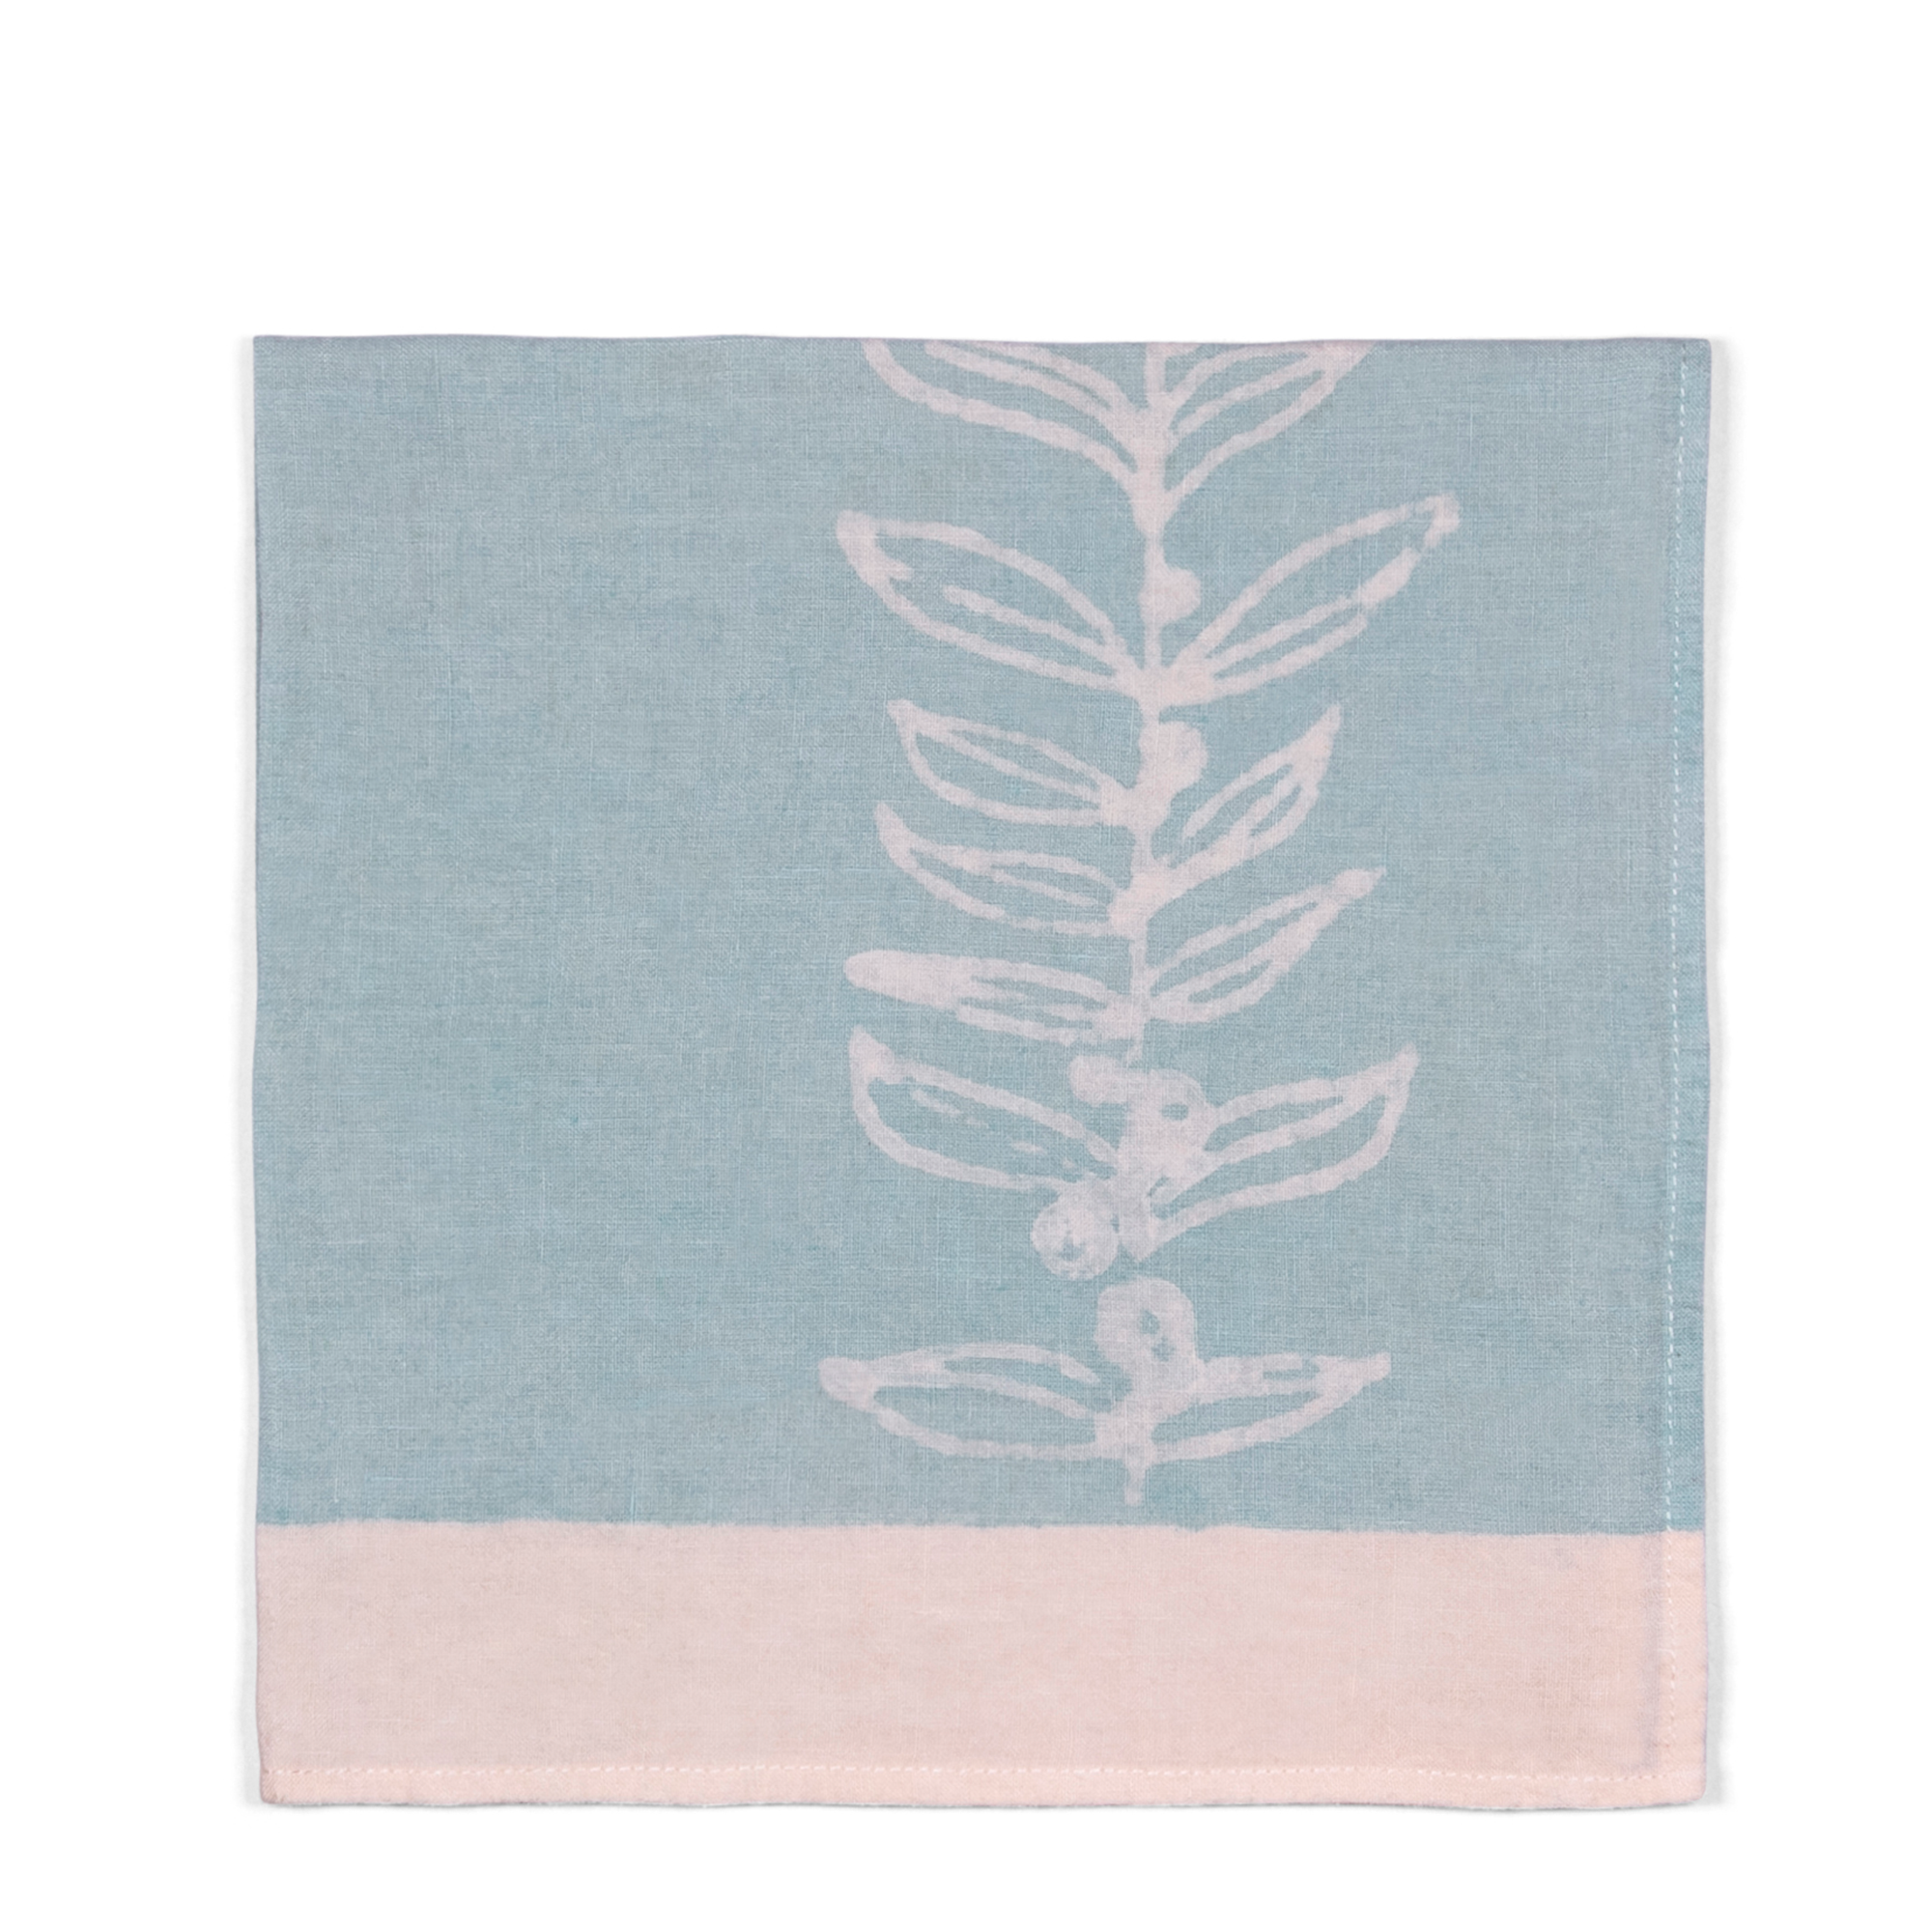 A 100% linen napkin in light blue and white border, with an illustration of a white tree. Perfect for breakfast, formal dining, or a garden tablescape.